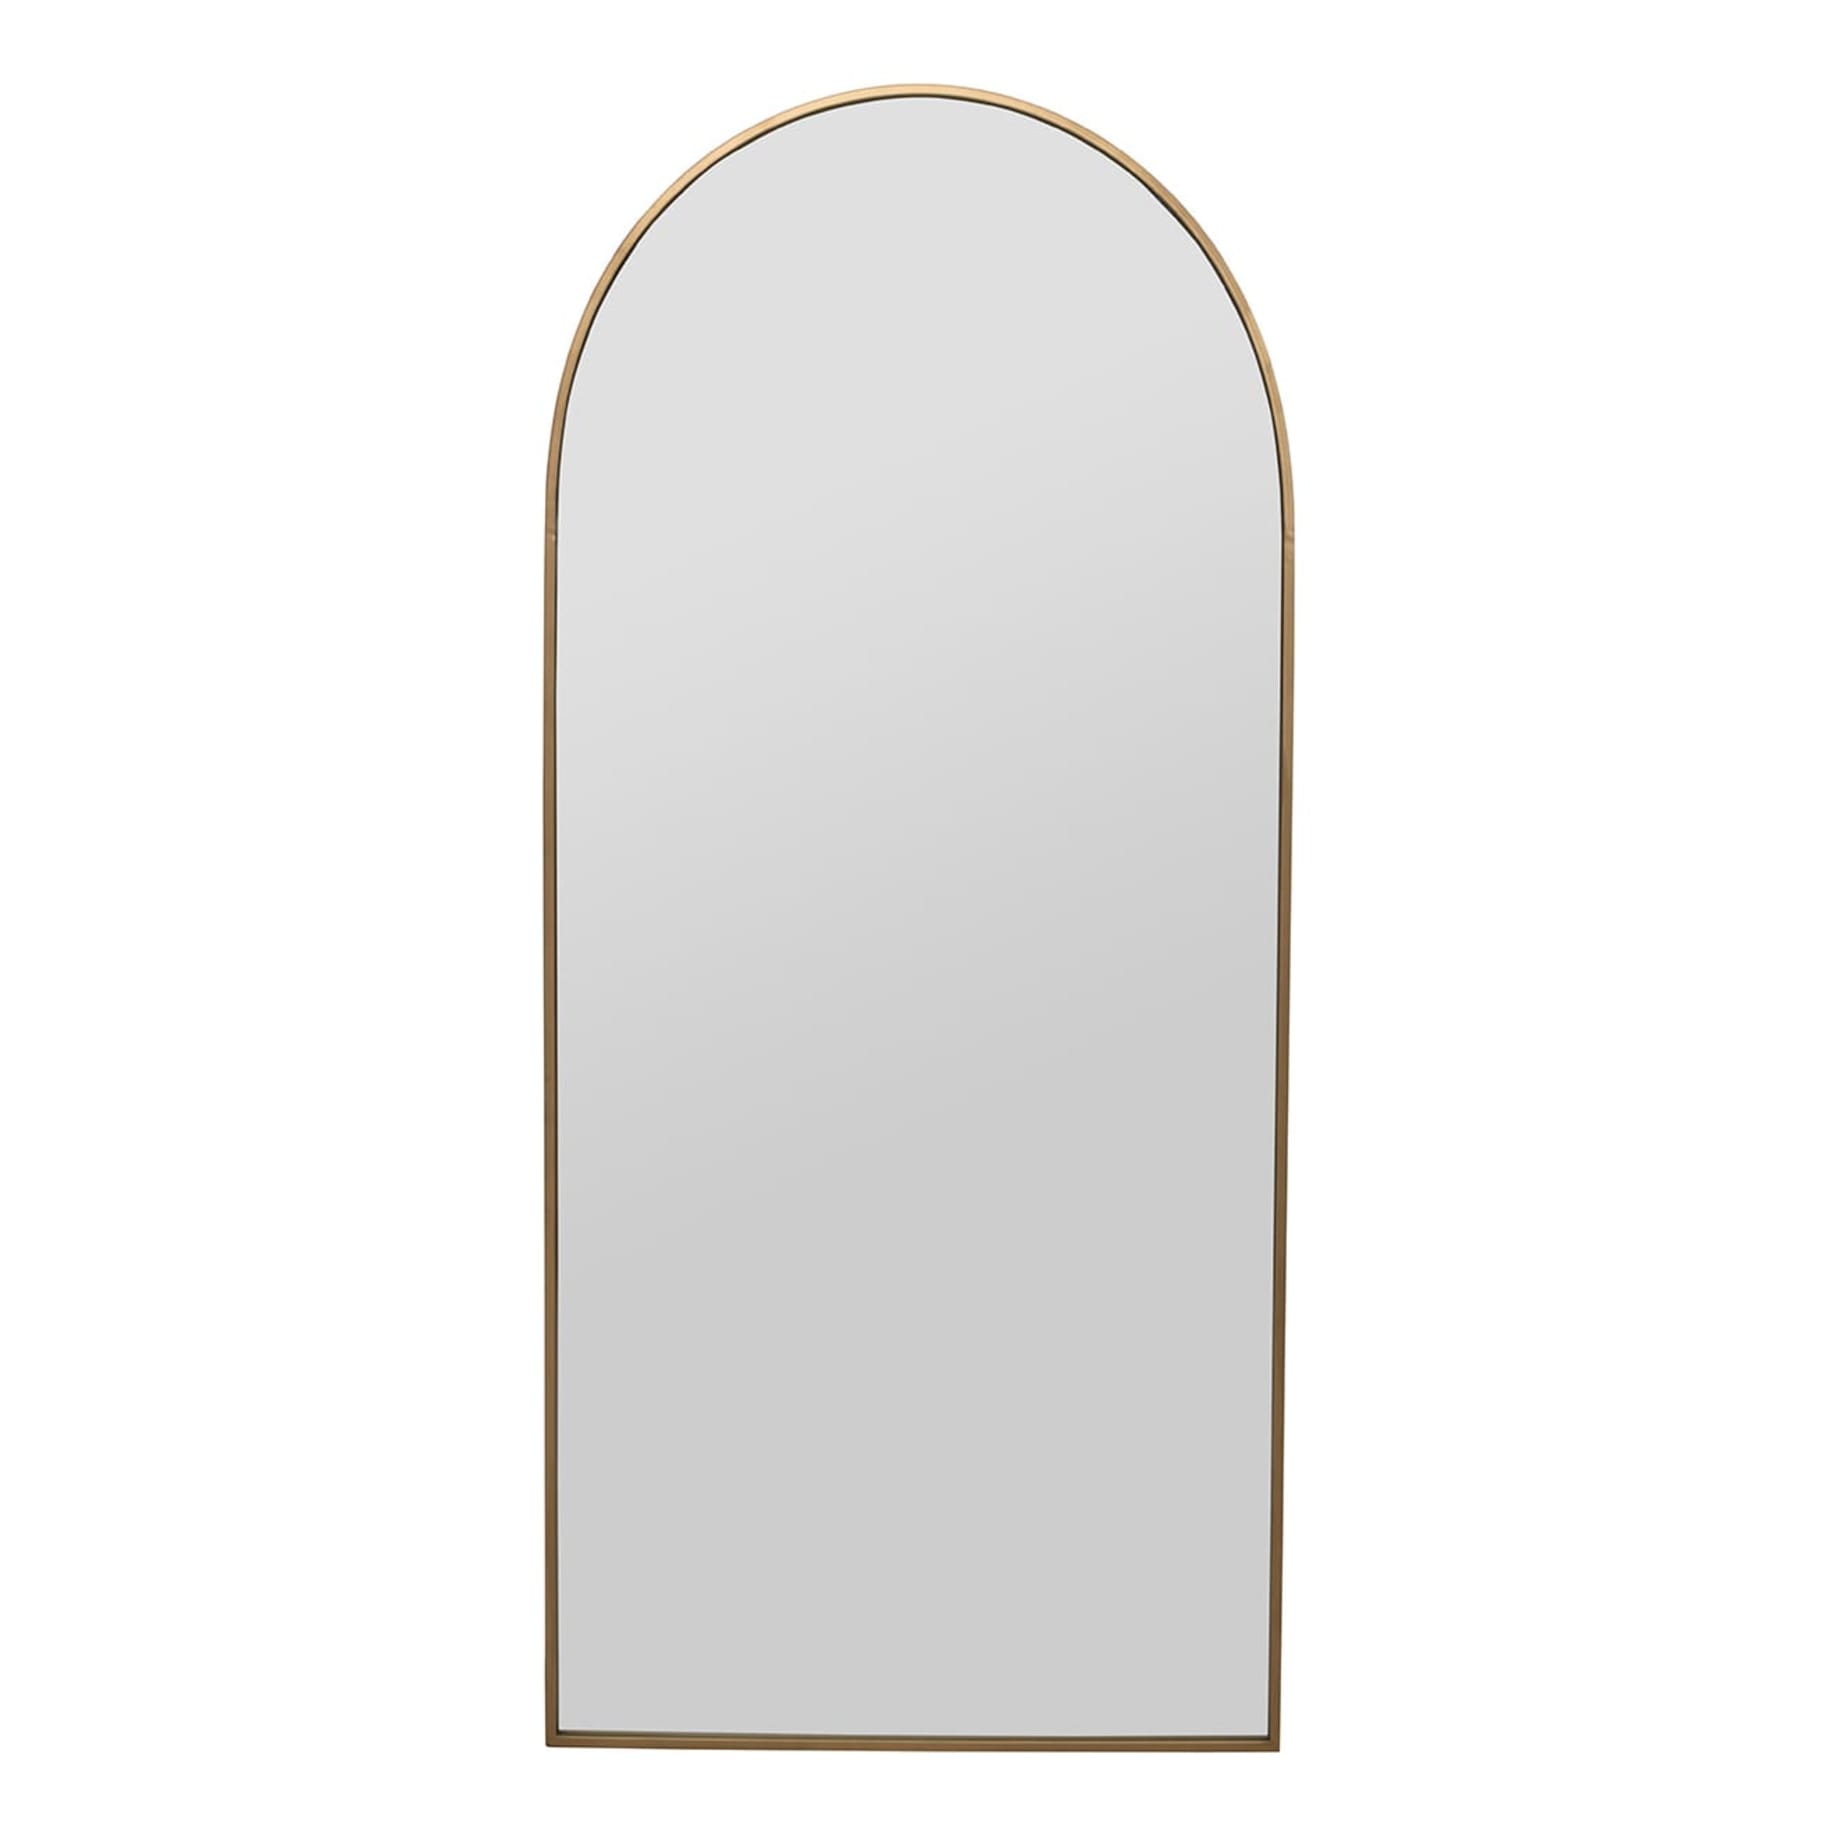 Arched Metal Freestanding Mirror 80x180cm in Gold